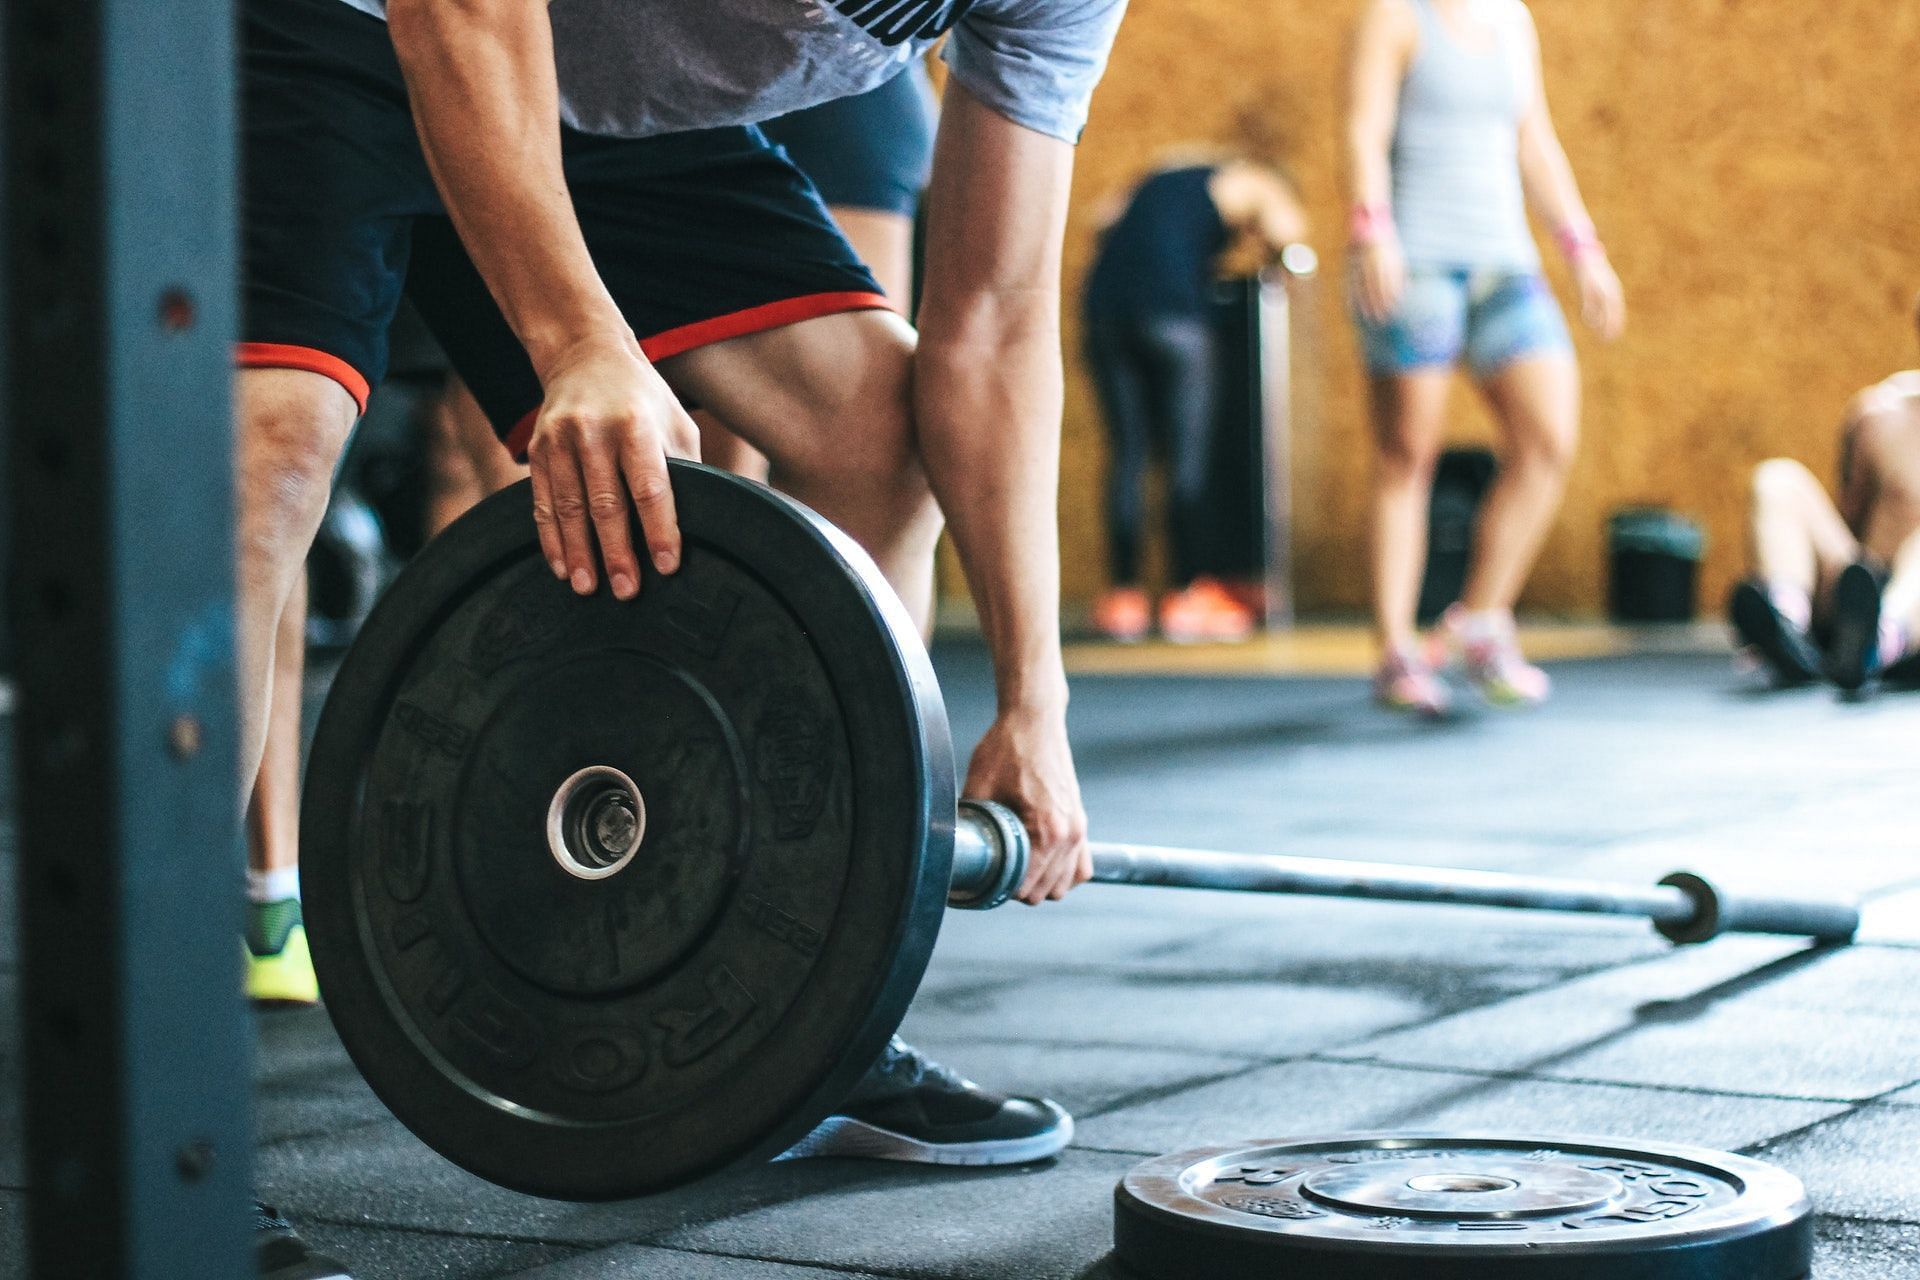 Reasons to include strength training in your workout routine. (Image via Pexels/Photo by Victor Freitas)